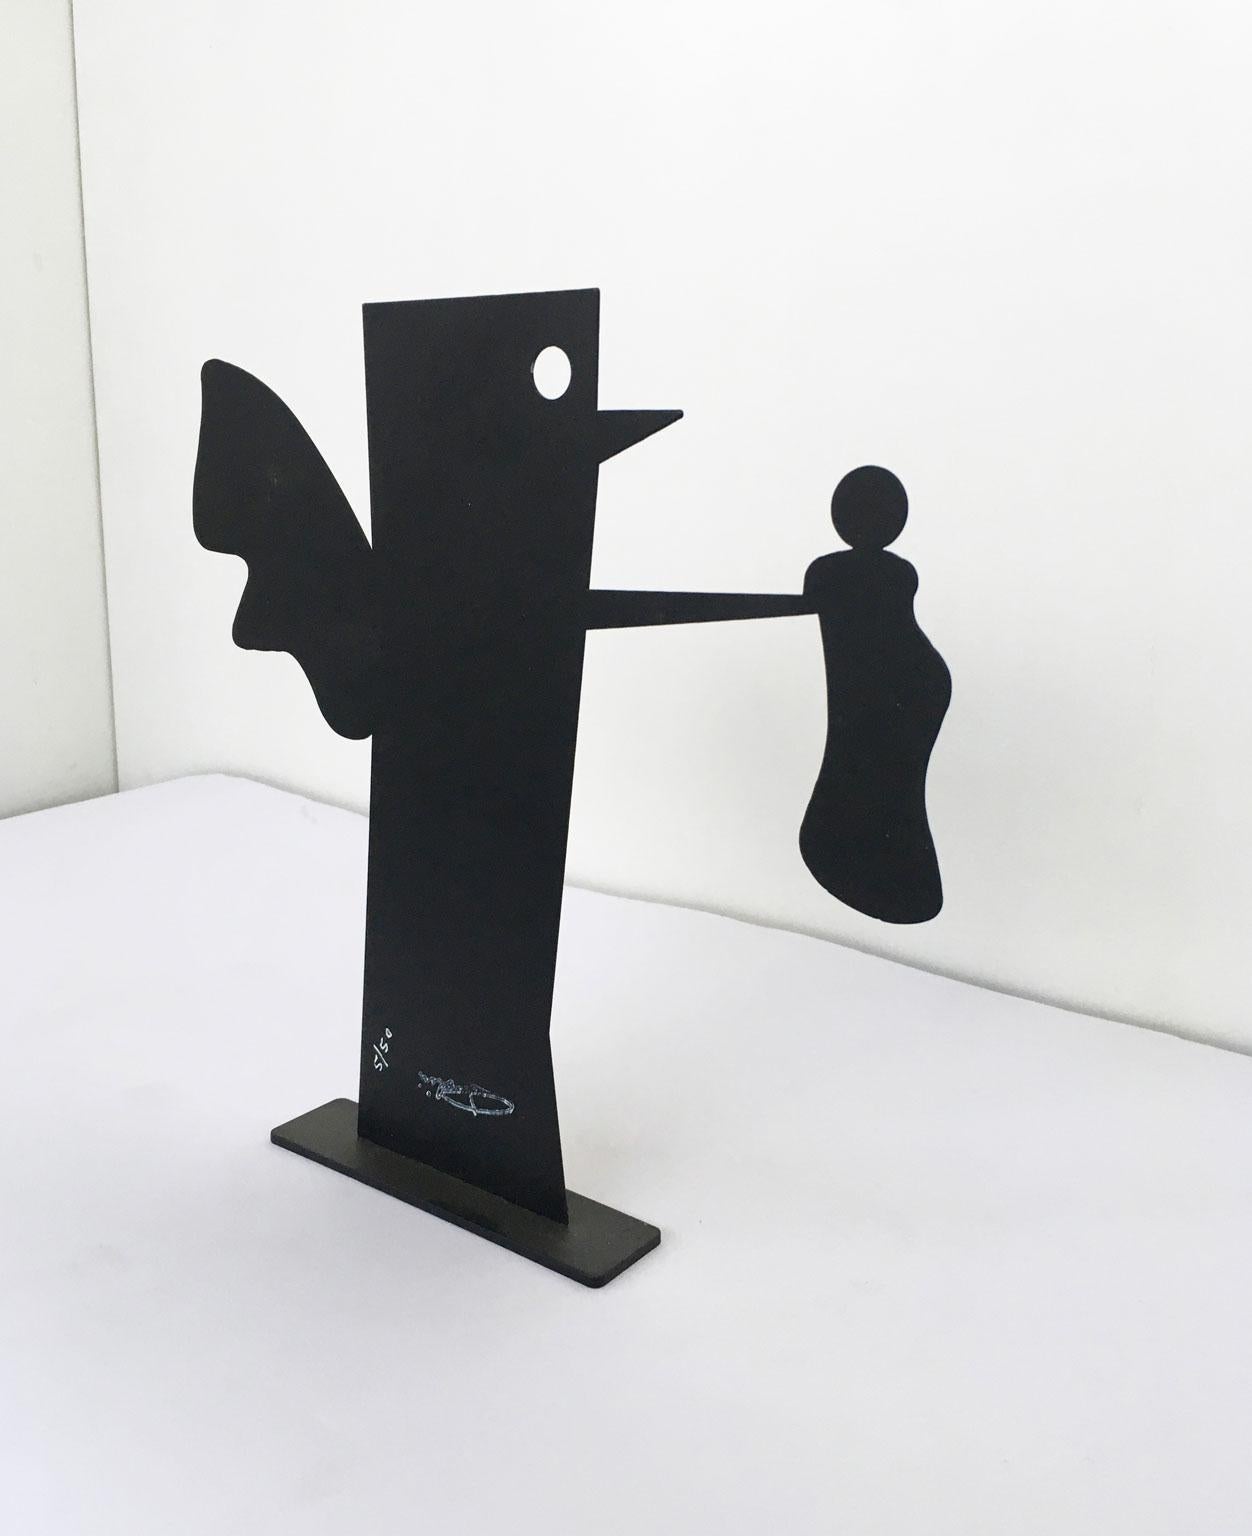 Italy 1980 Riccardo Dalisi Black Metal Painted Sculpture Caffellatte For Sale 9